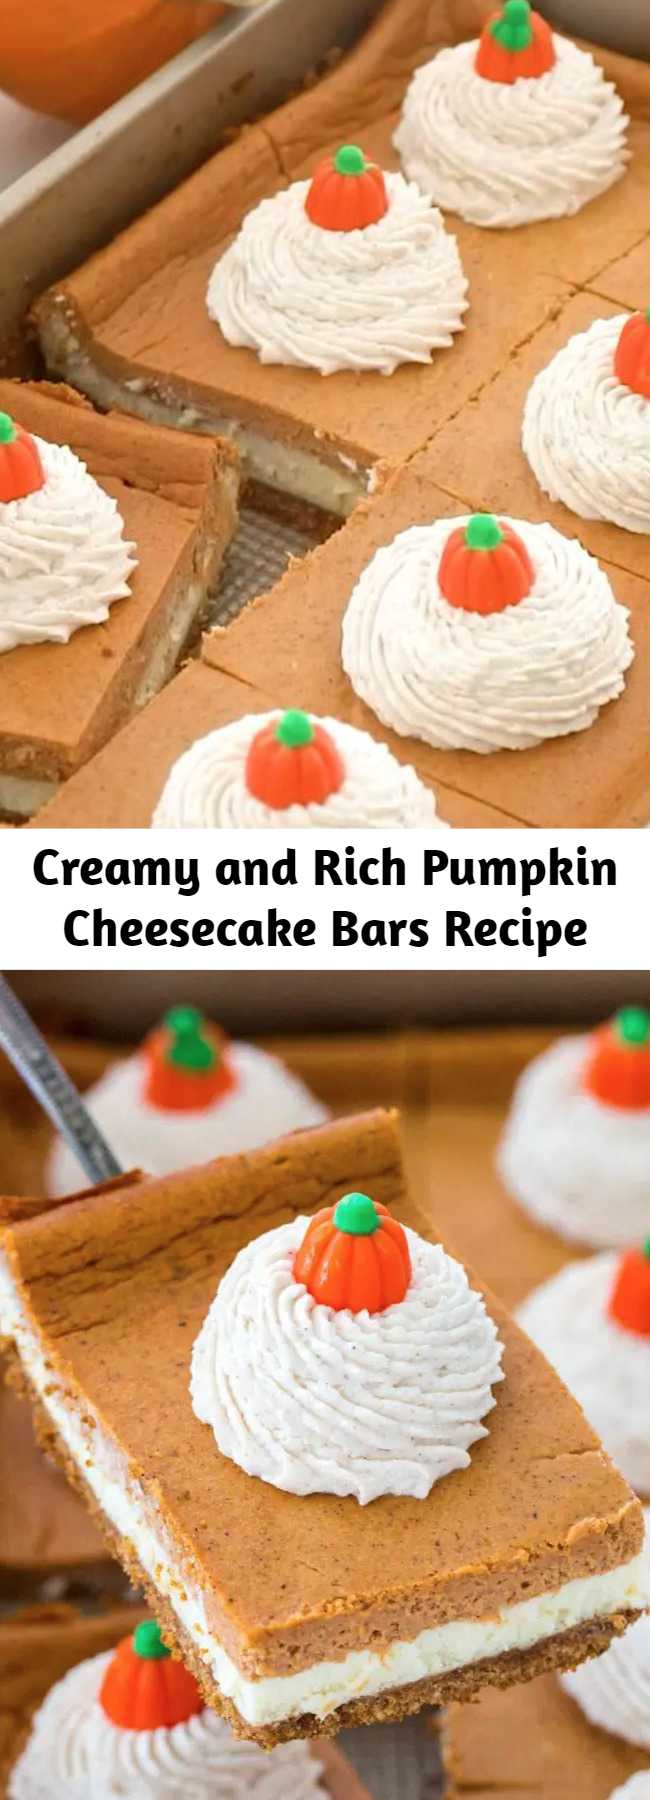 Creamy and Rich Pumpkin Cheesecake Bars Recipe - Pumpkin Cheesecake Bars are luxuriously creamy and rich, with lots of pumpkin flavor. Topped with a hefty amount of homemade cinnamon whipped cream.